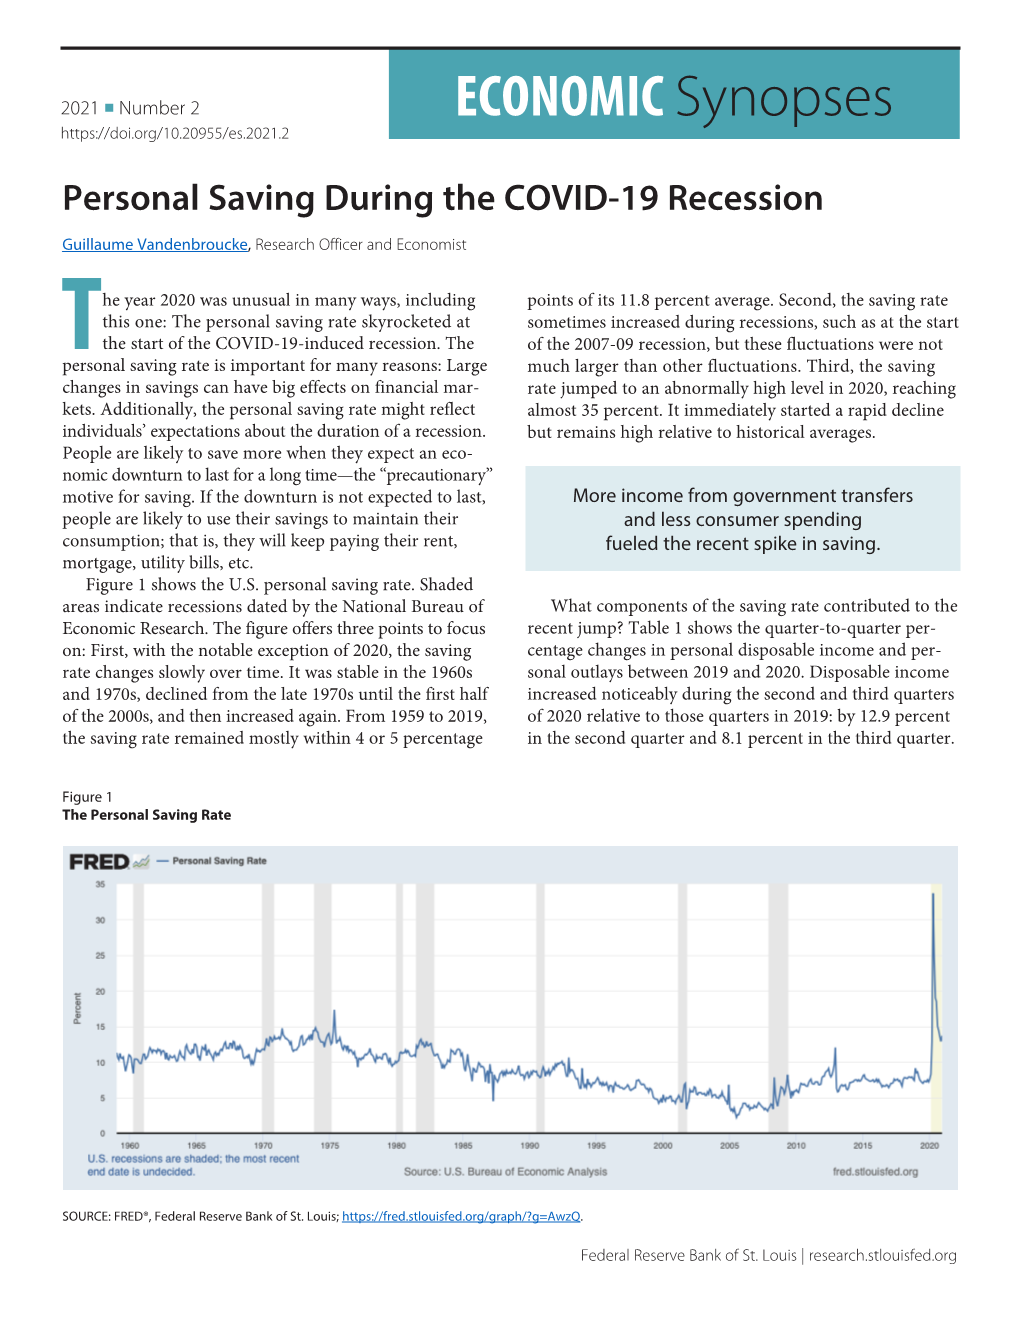 Personal Saving During the COVID-19 Recession